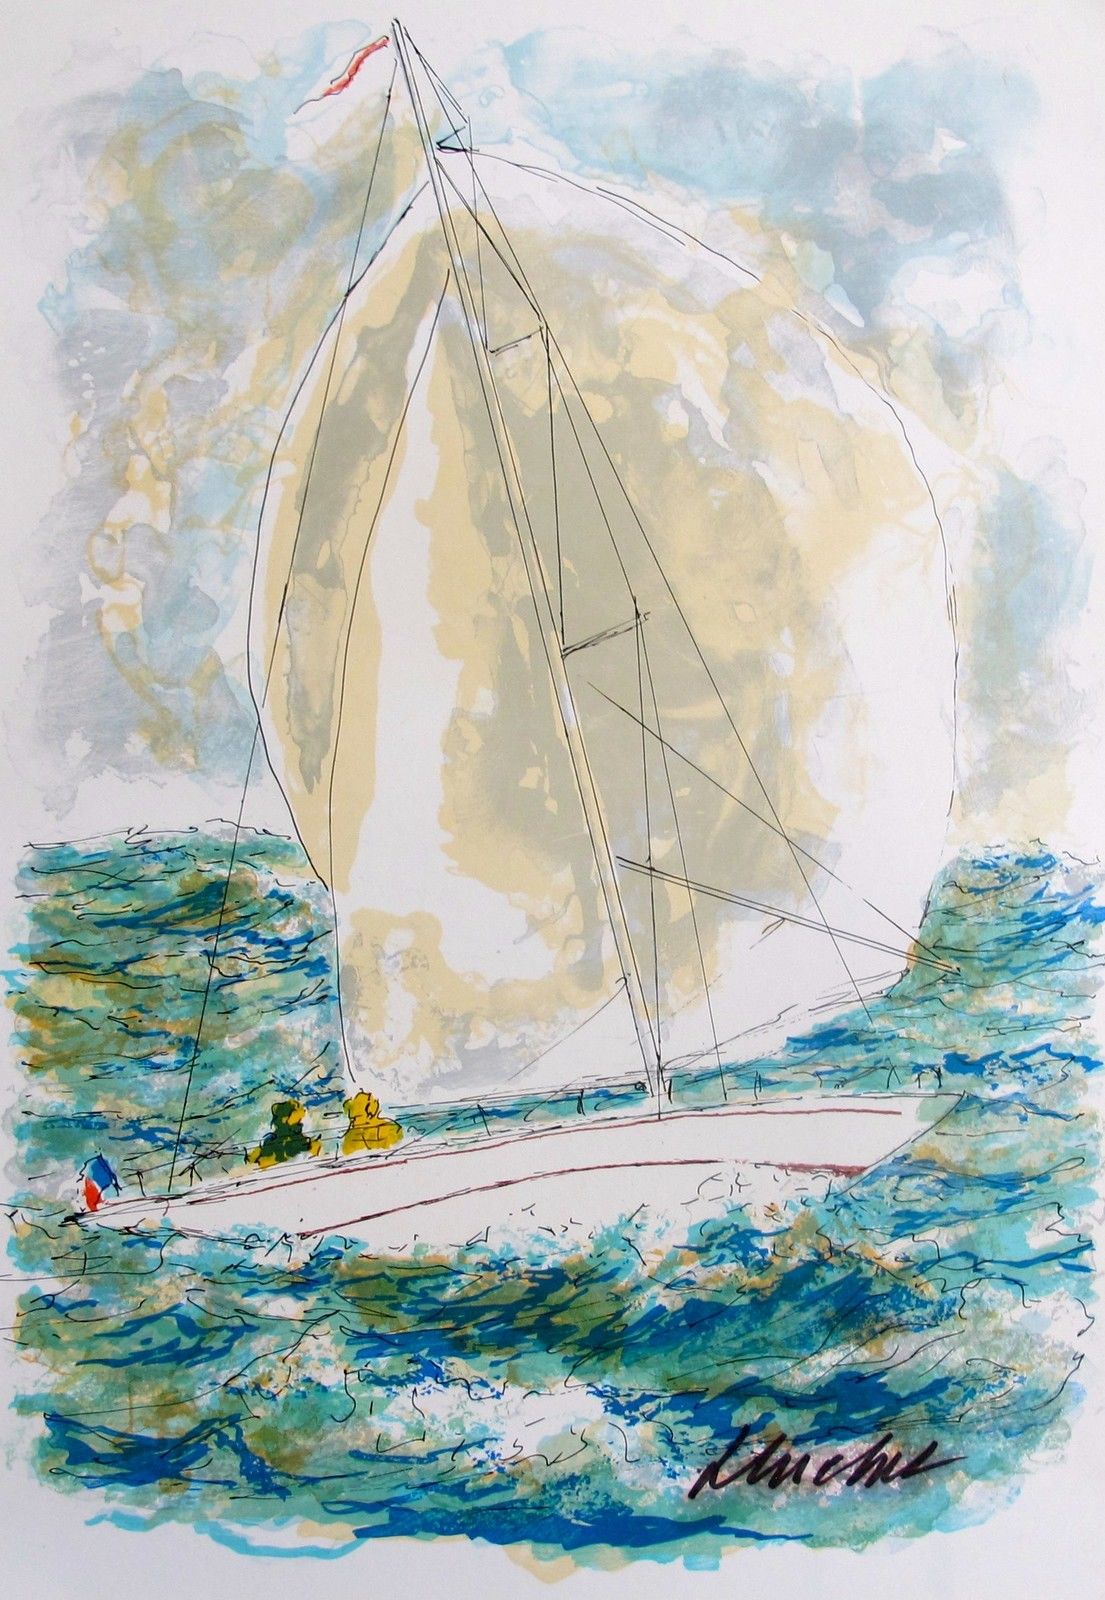 Urbain Huchet RACING YACHT IN ST. TROPEZ Hand Signed Limited Edition Lithograph